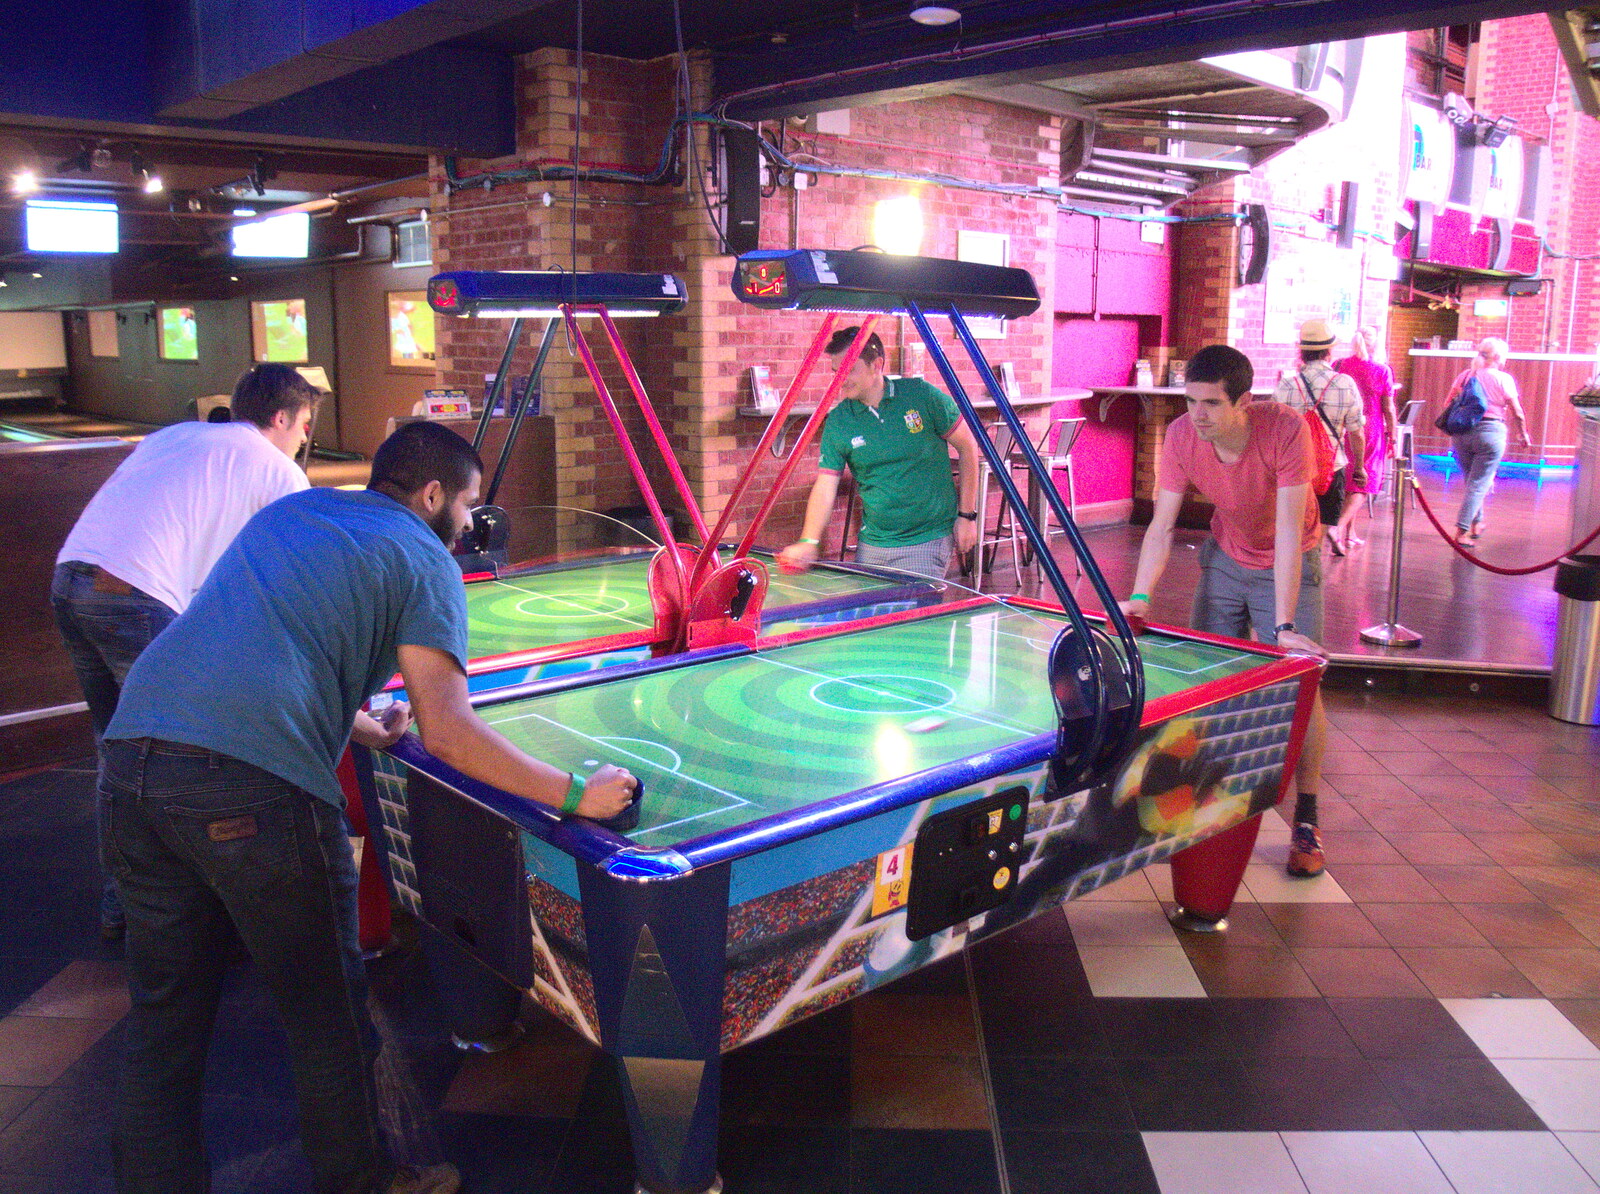 There's more air hockey action from SwiftKey does Namco Funscape, Westminster, London - 20th June 2017